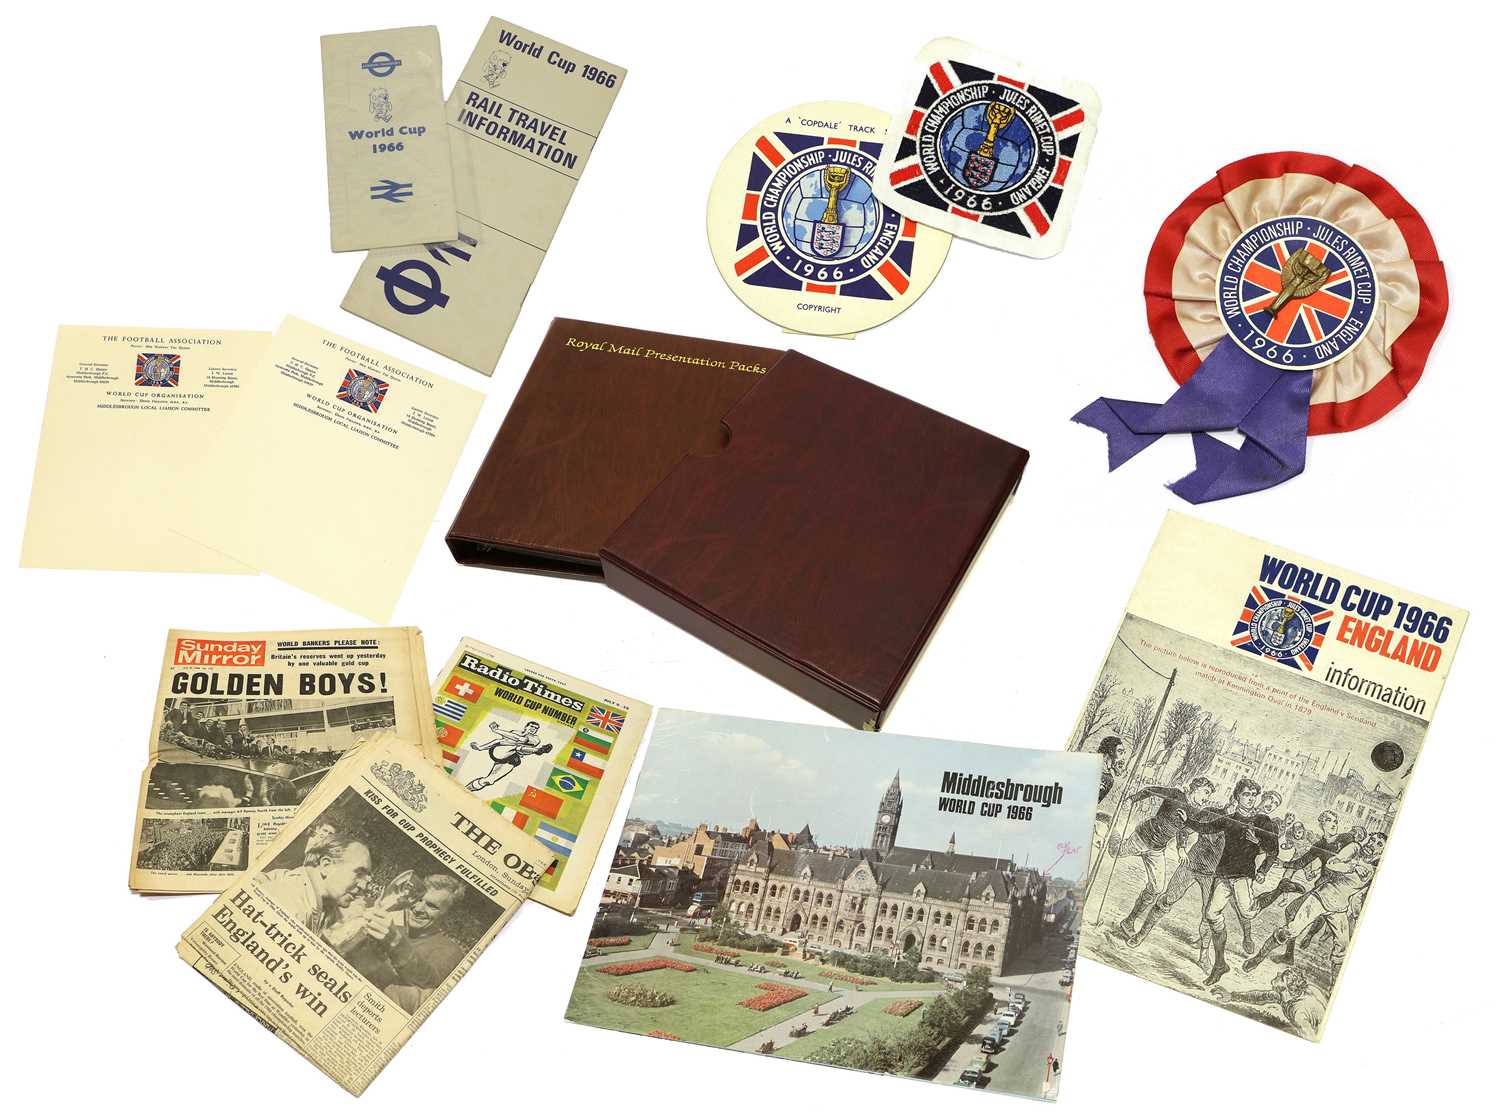 1966 World Cup Related Items